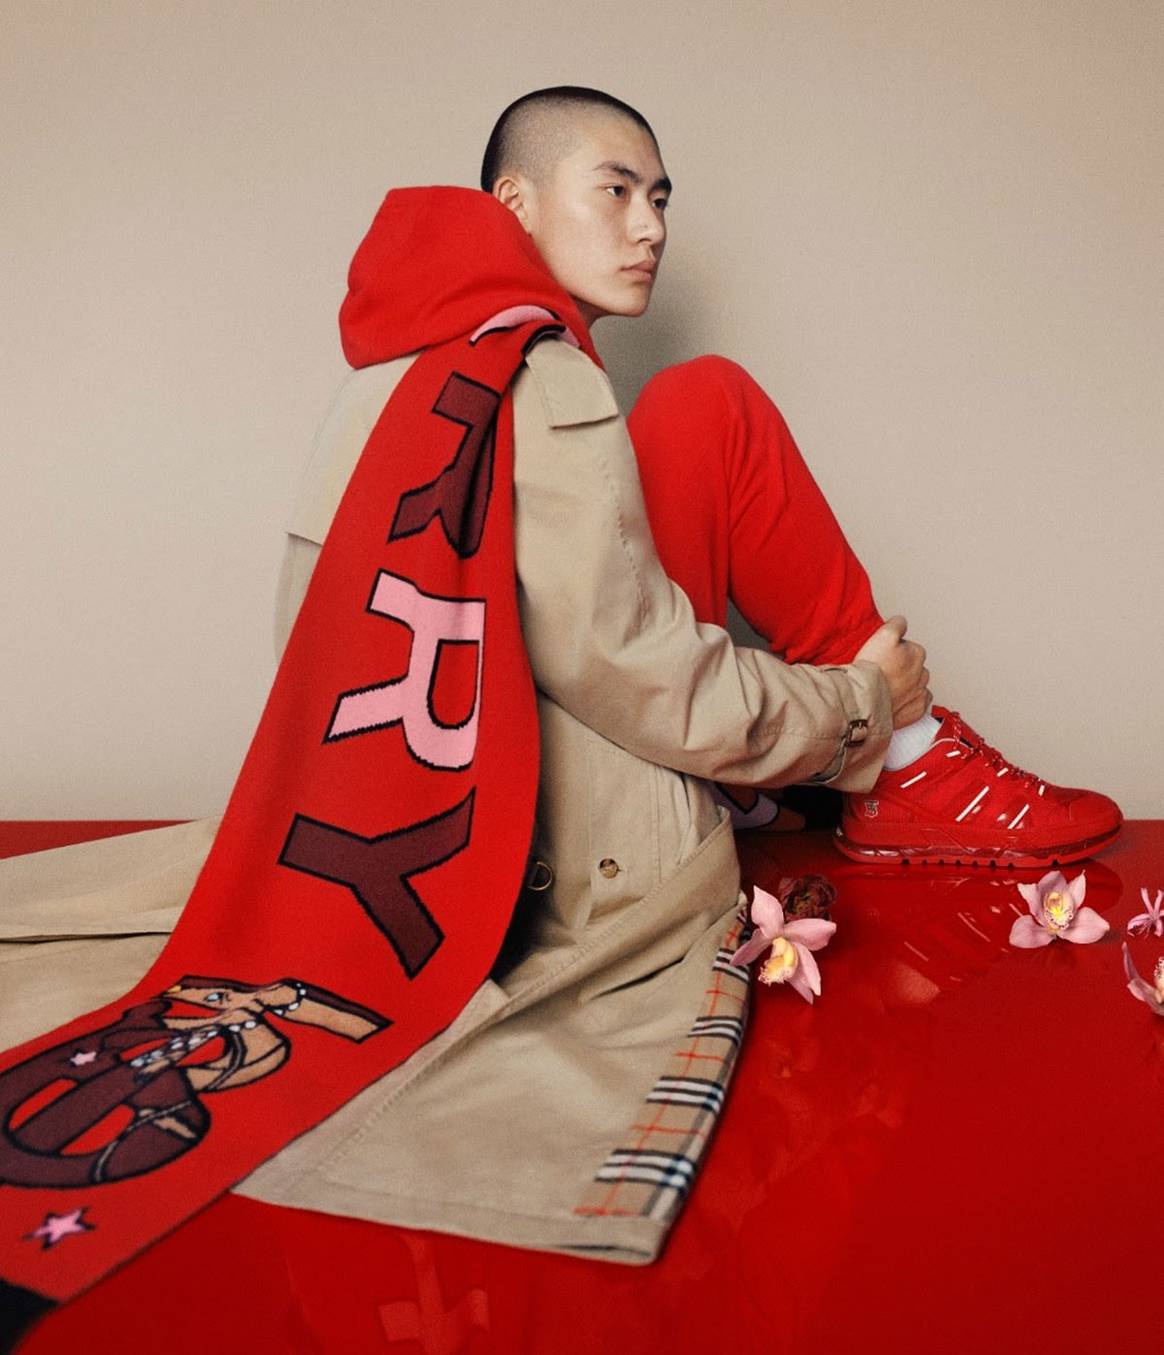 BURBERRY REVEALS CHINESE NEW YEAR 2020 CAMPAIGN